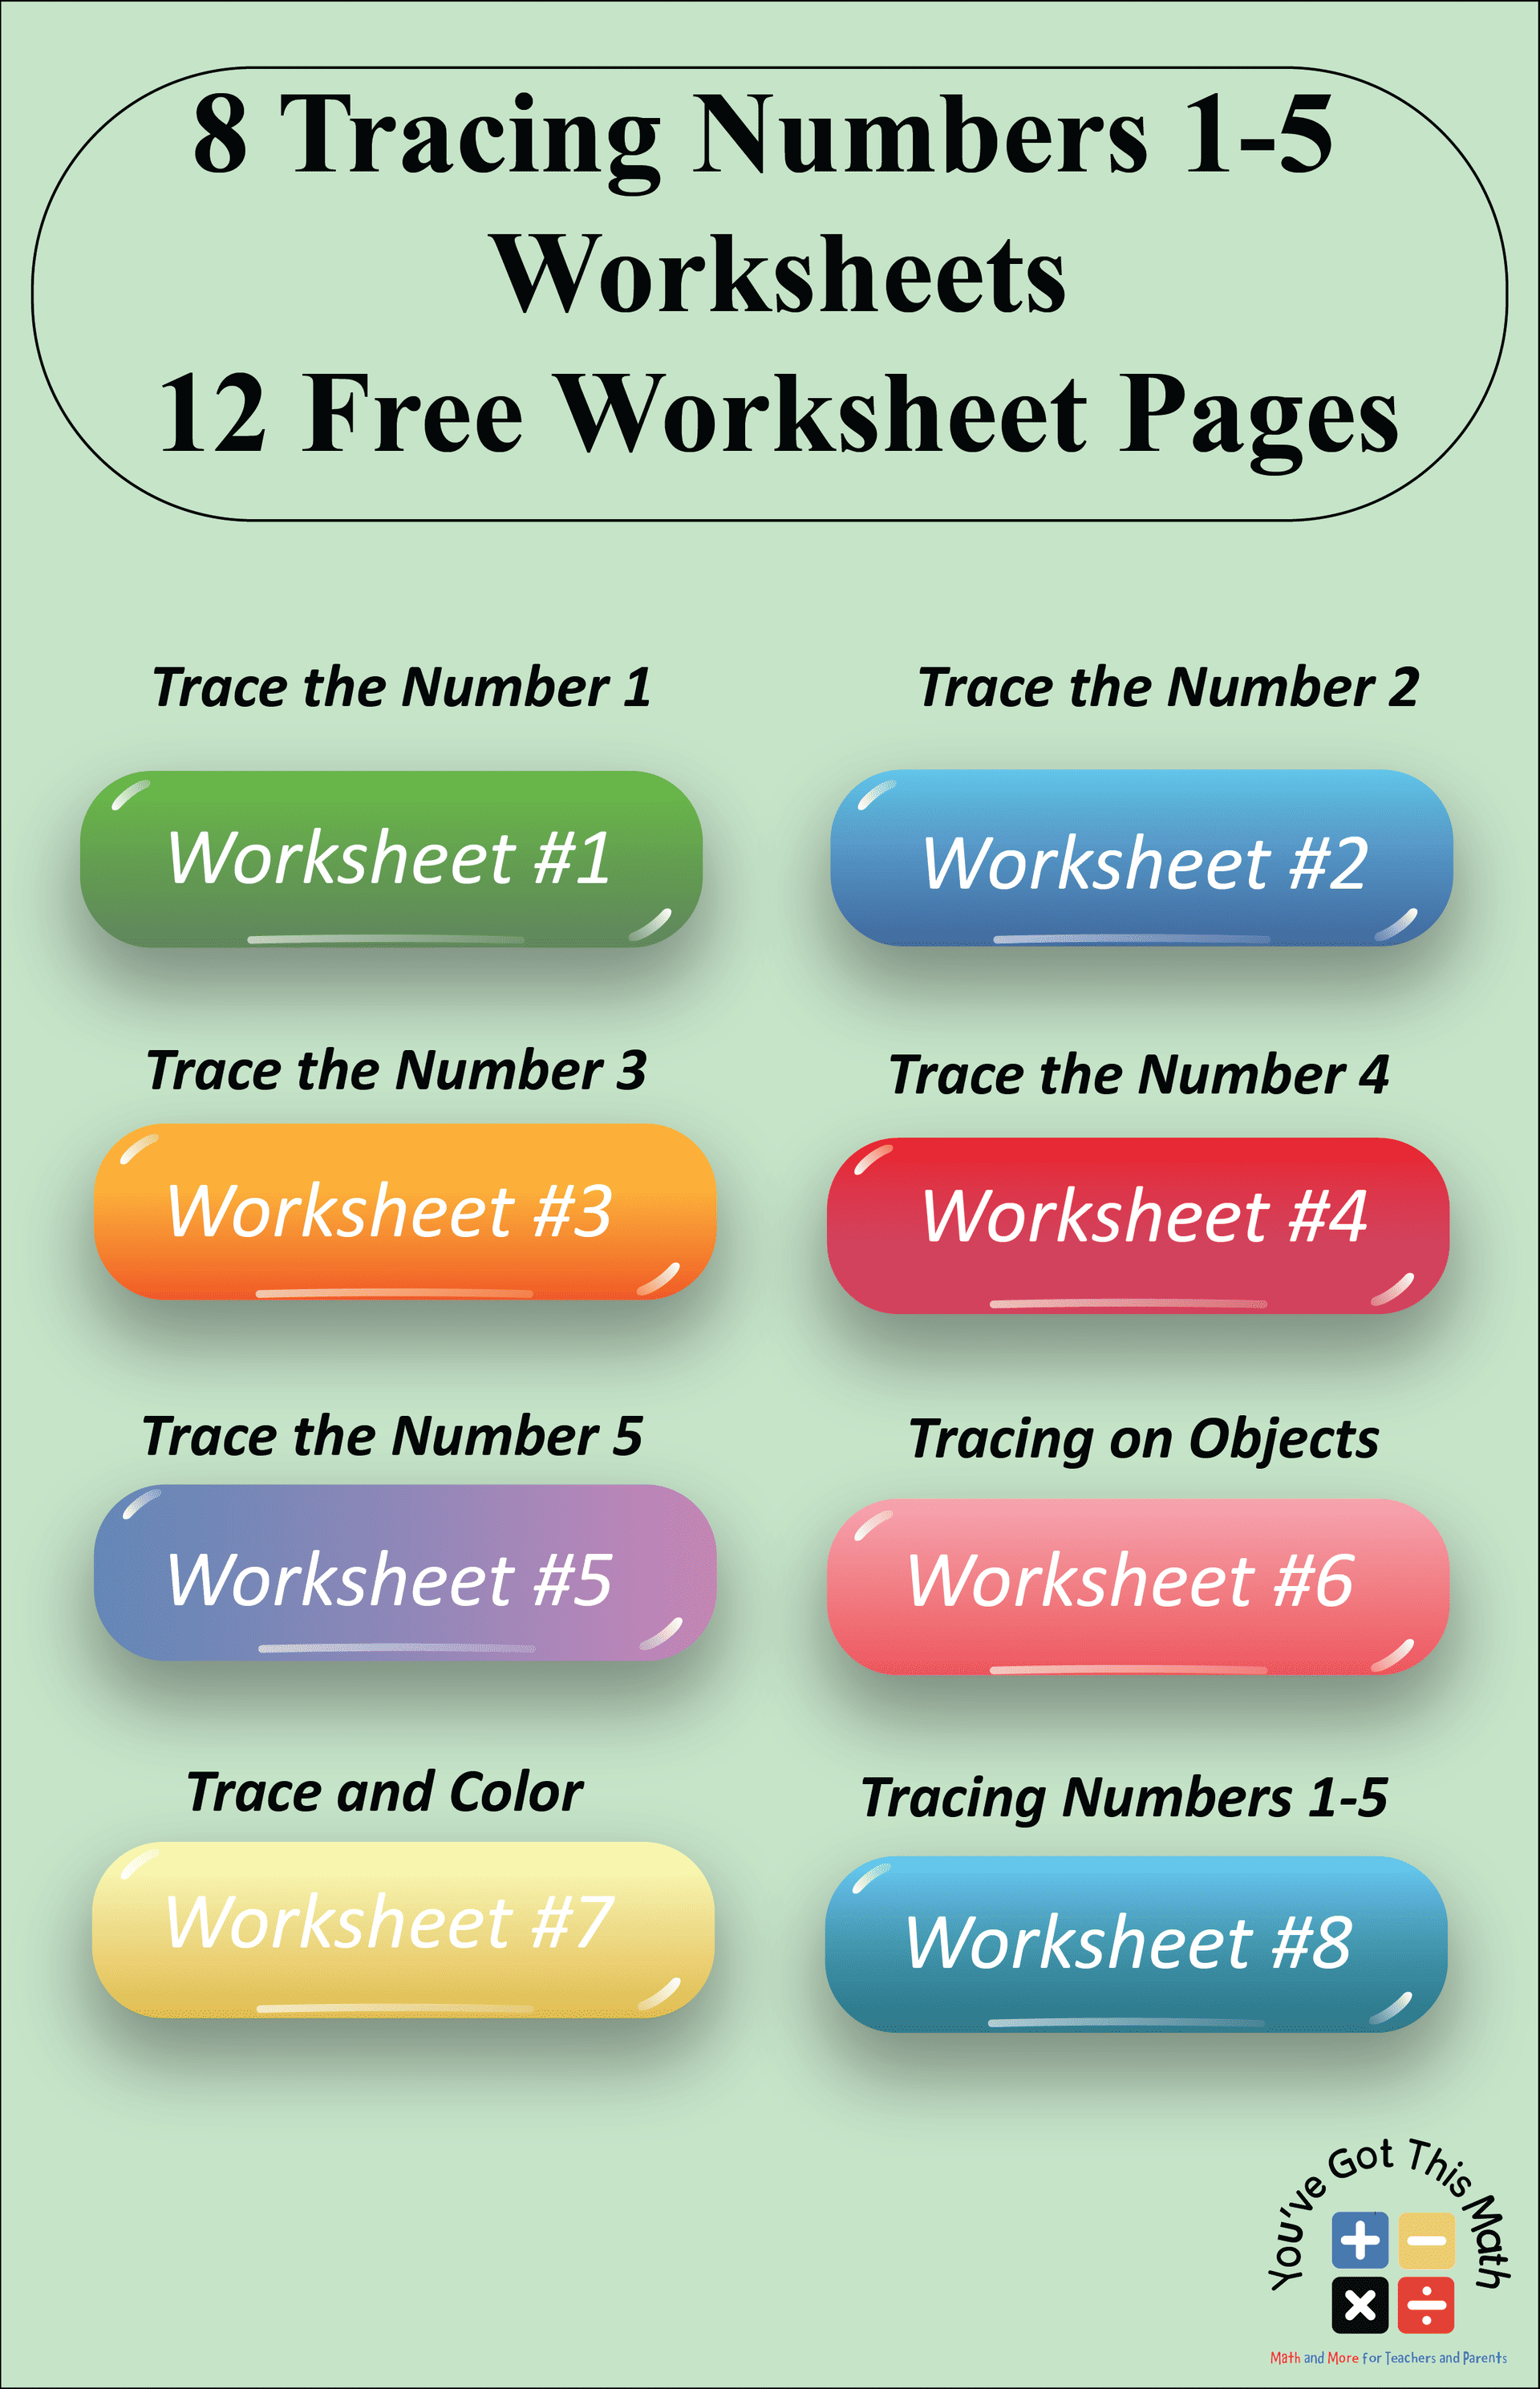 Tracing Numbers 1-5 Worksheets box image-01